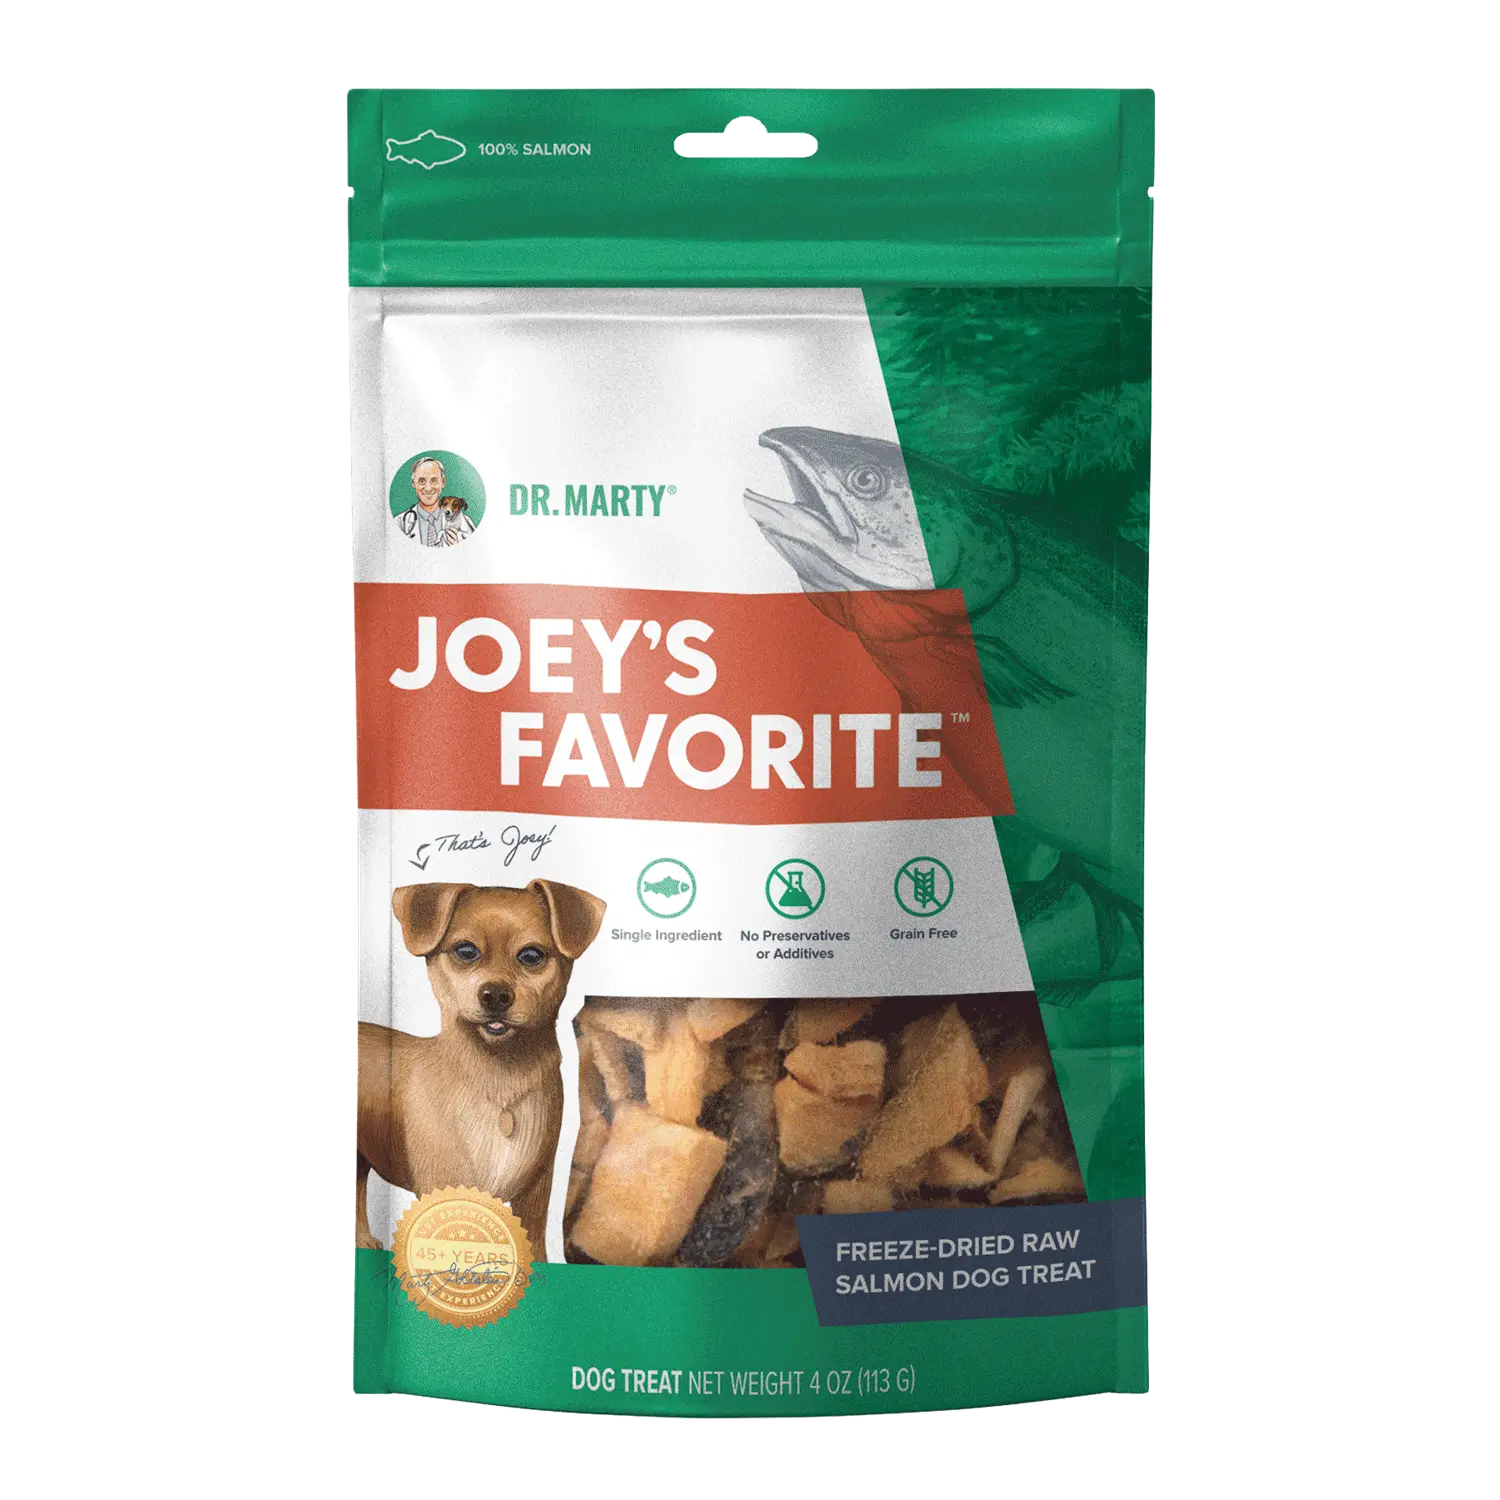 Dr. Marty Joey's Favorite Salmon Dog Treat 4oz Dr. Marty